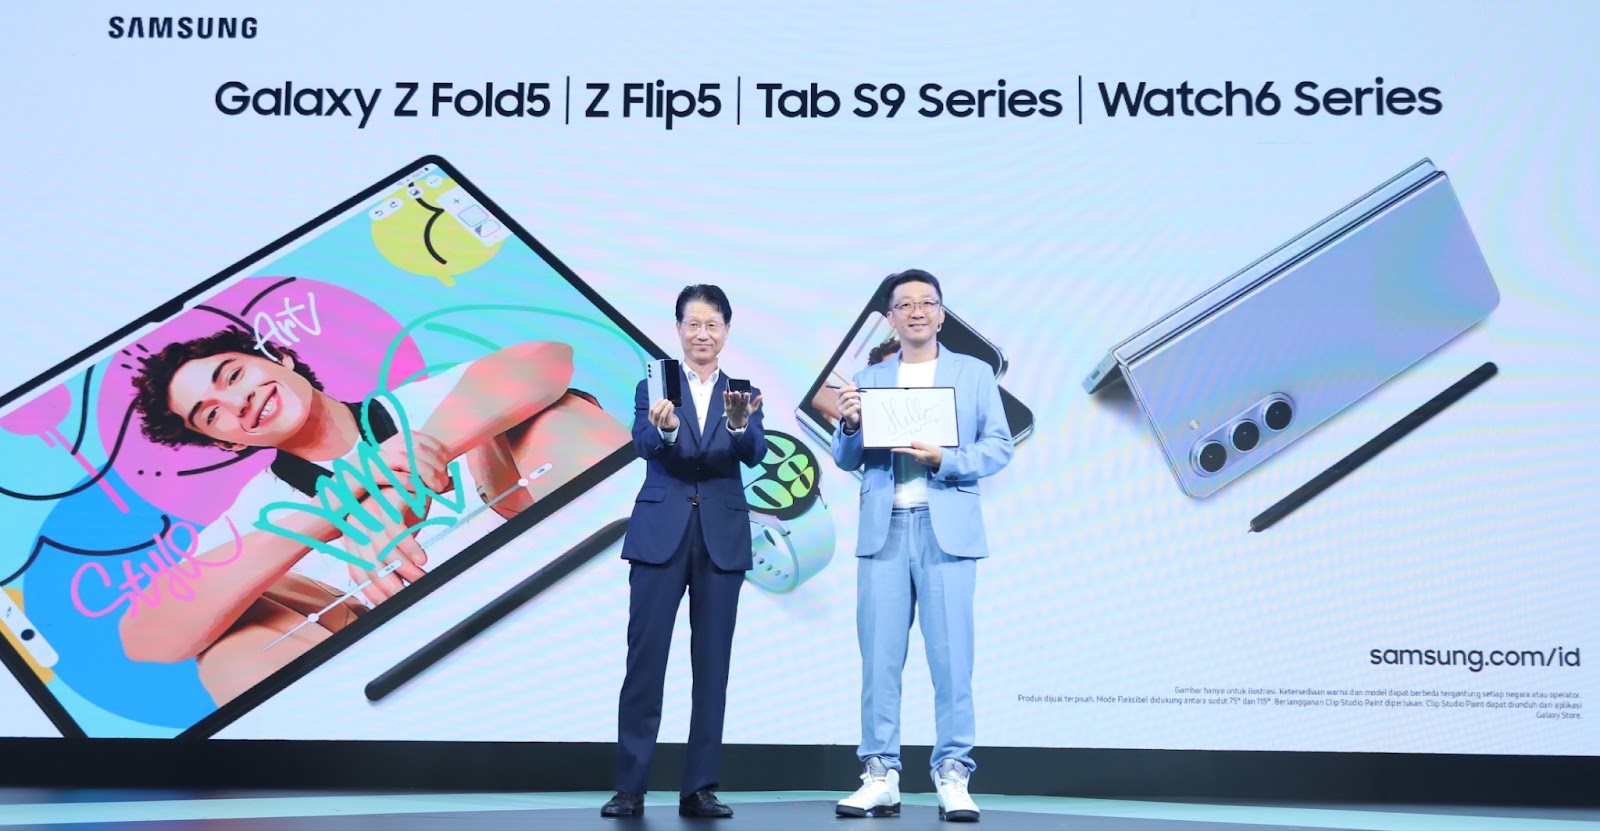 Samsung Join the Flip Side